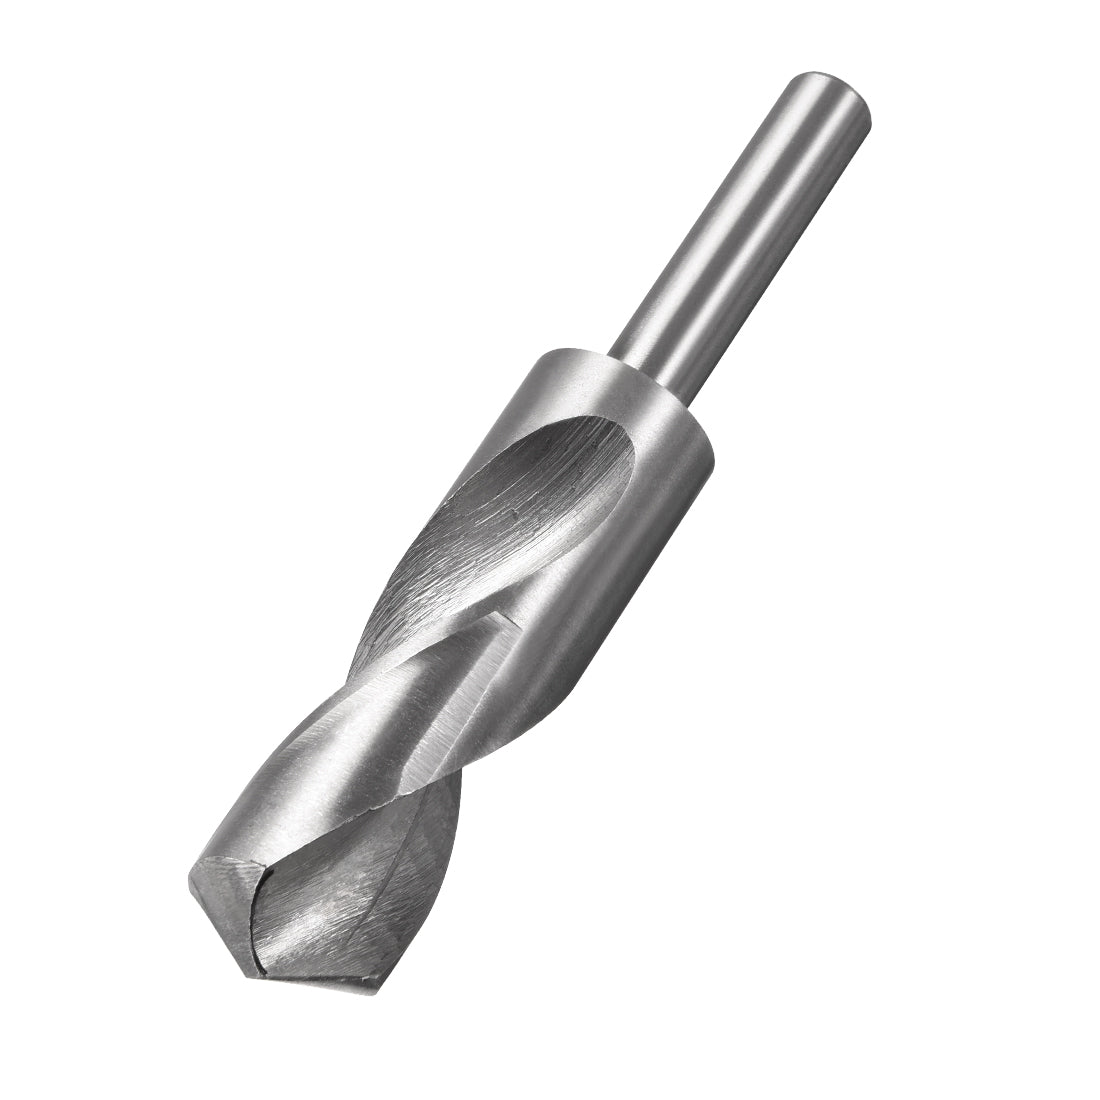 uxcell Uxcell 27mm Reduced Shank Drill Bit High Speed Steel 4241 with 1/2" Straight Shank